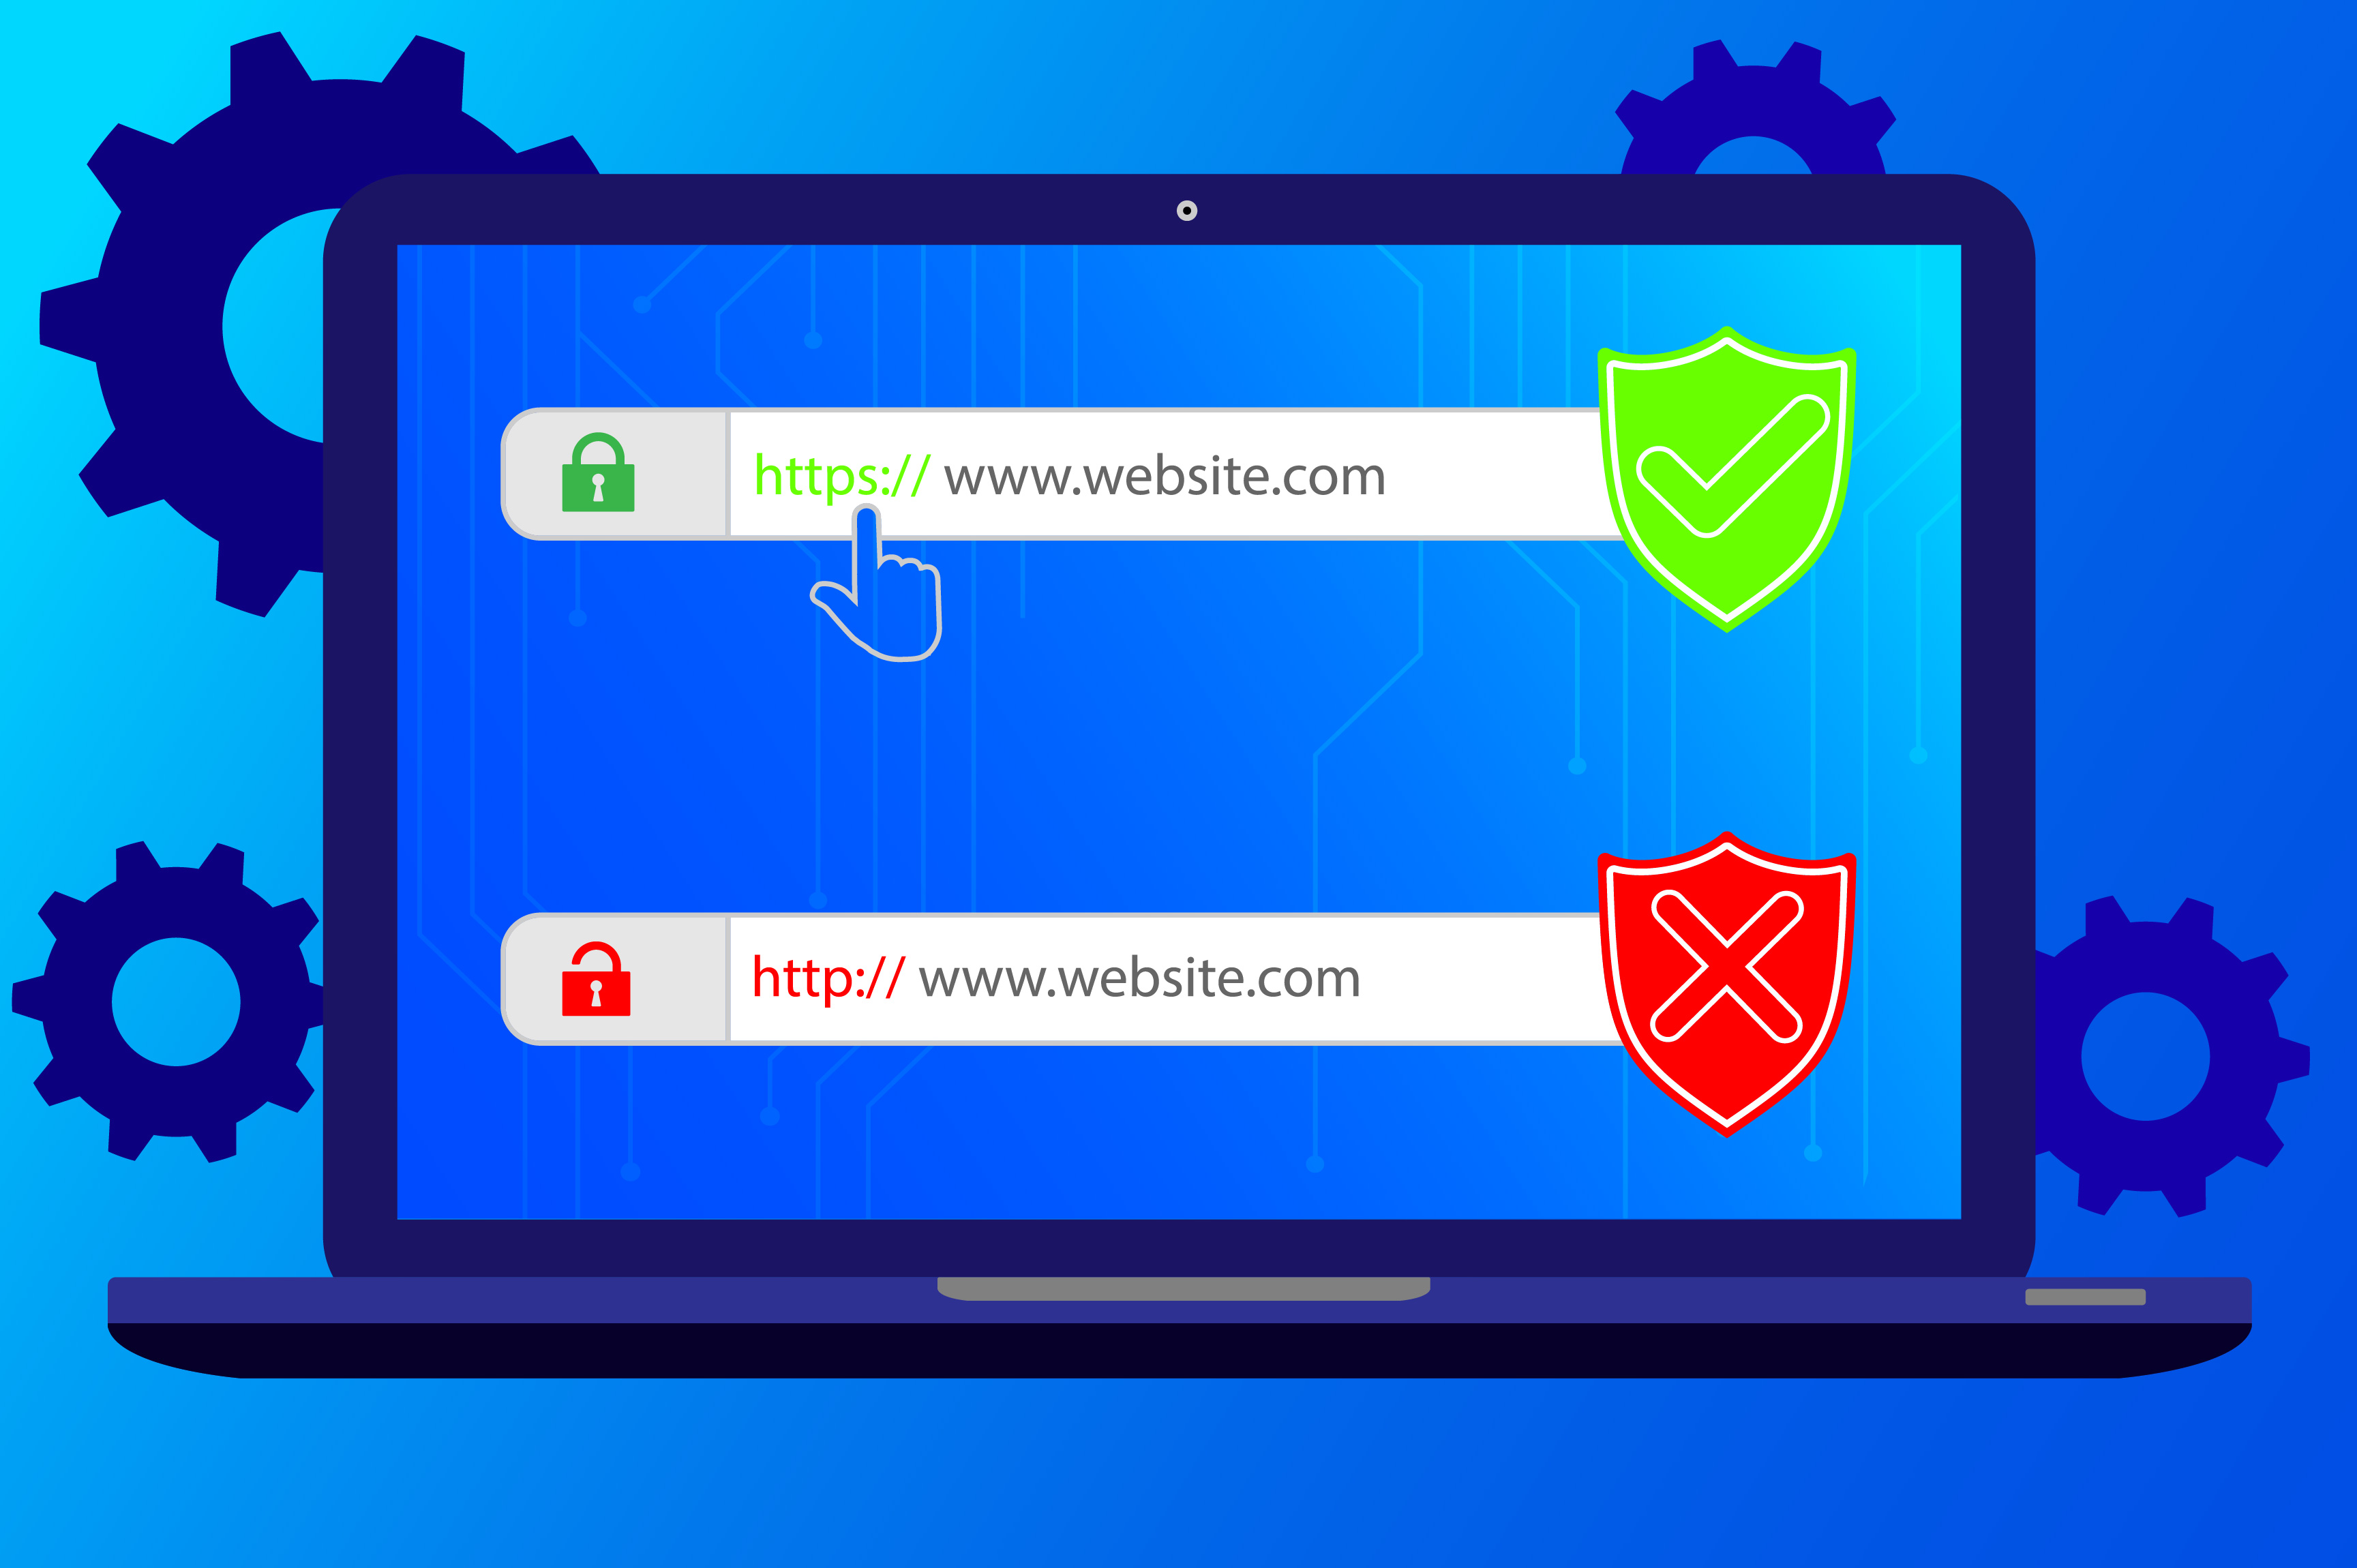 When you install SSL on your site, a padlock will appear in the address bar.